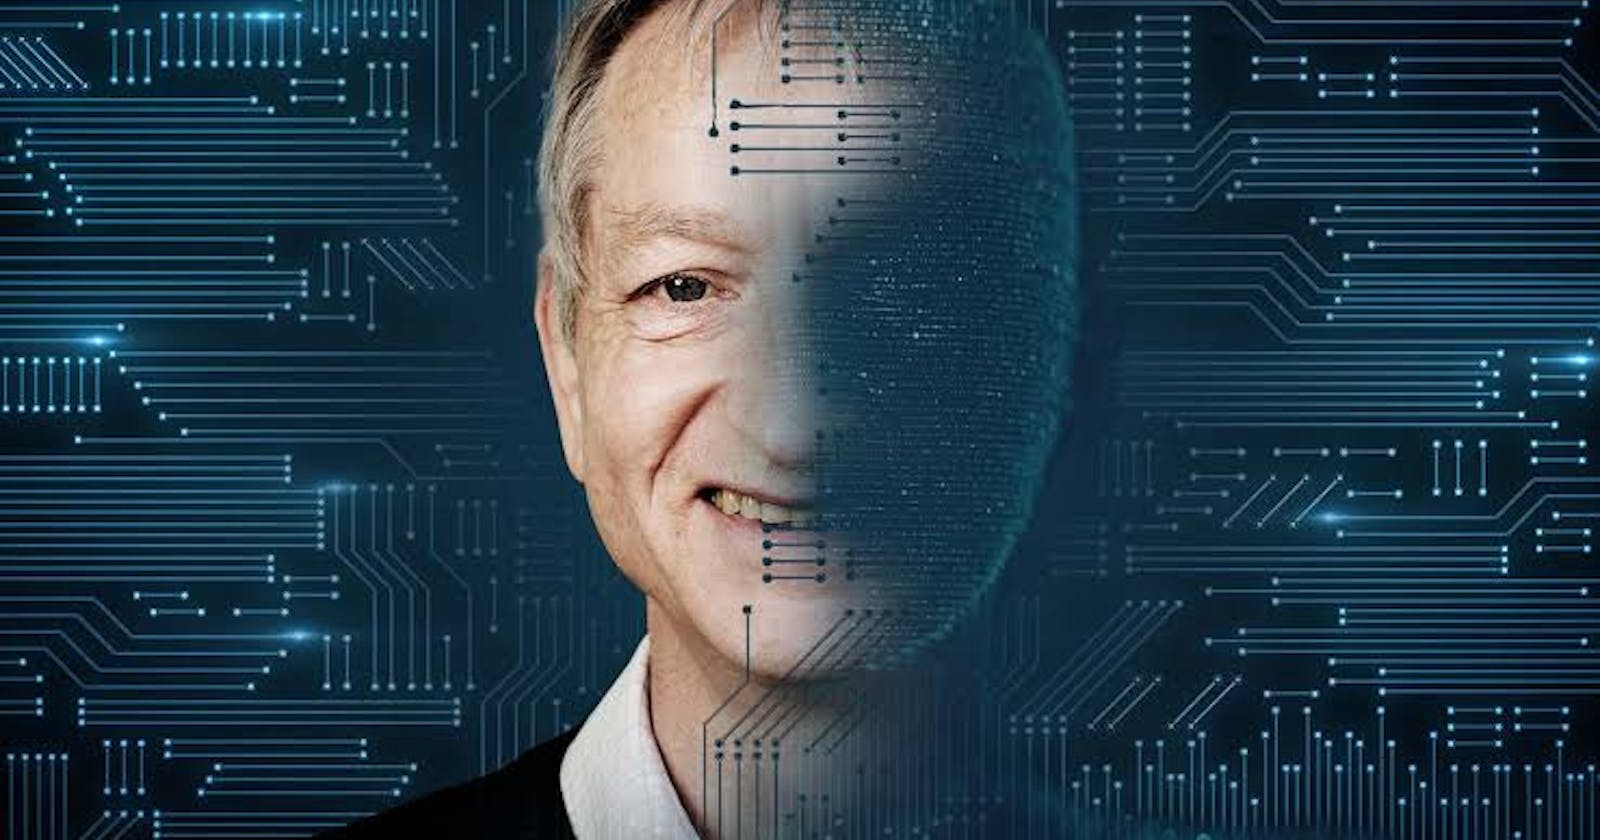 The Regrets and Fears of Geoffrey Hinton, the 'Godfather of AI'